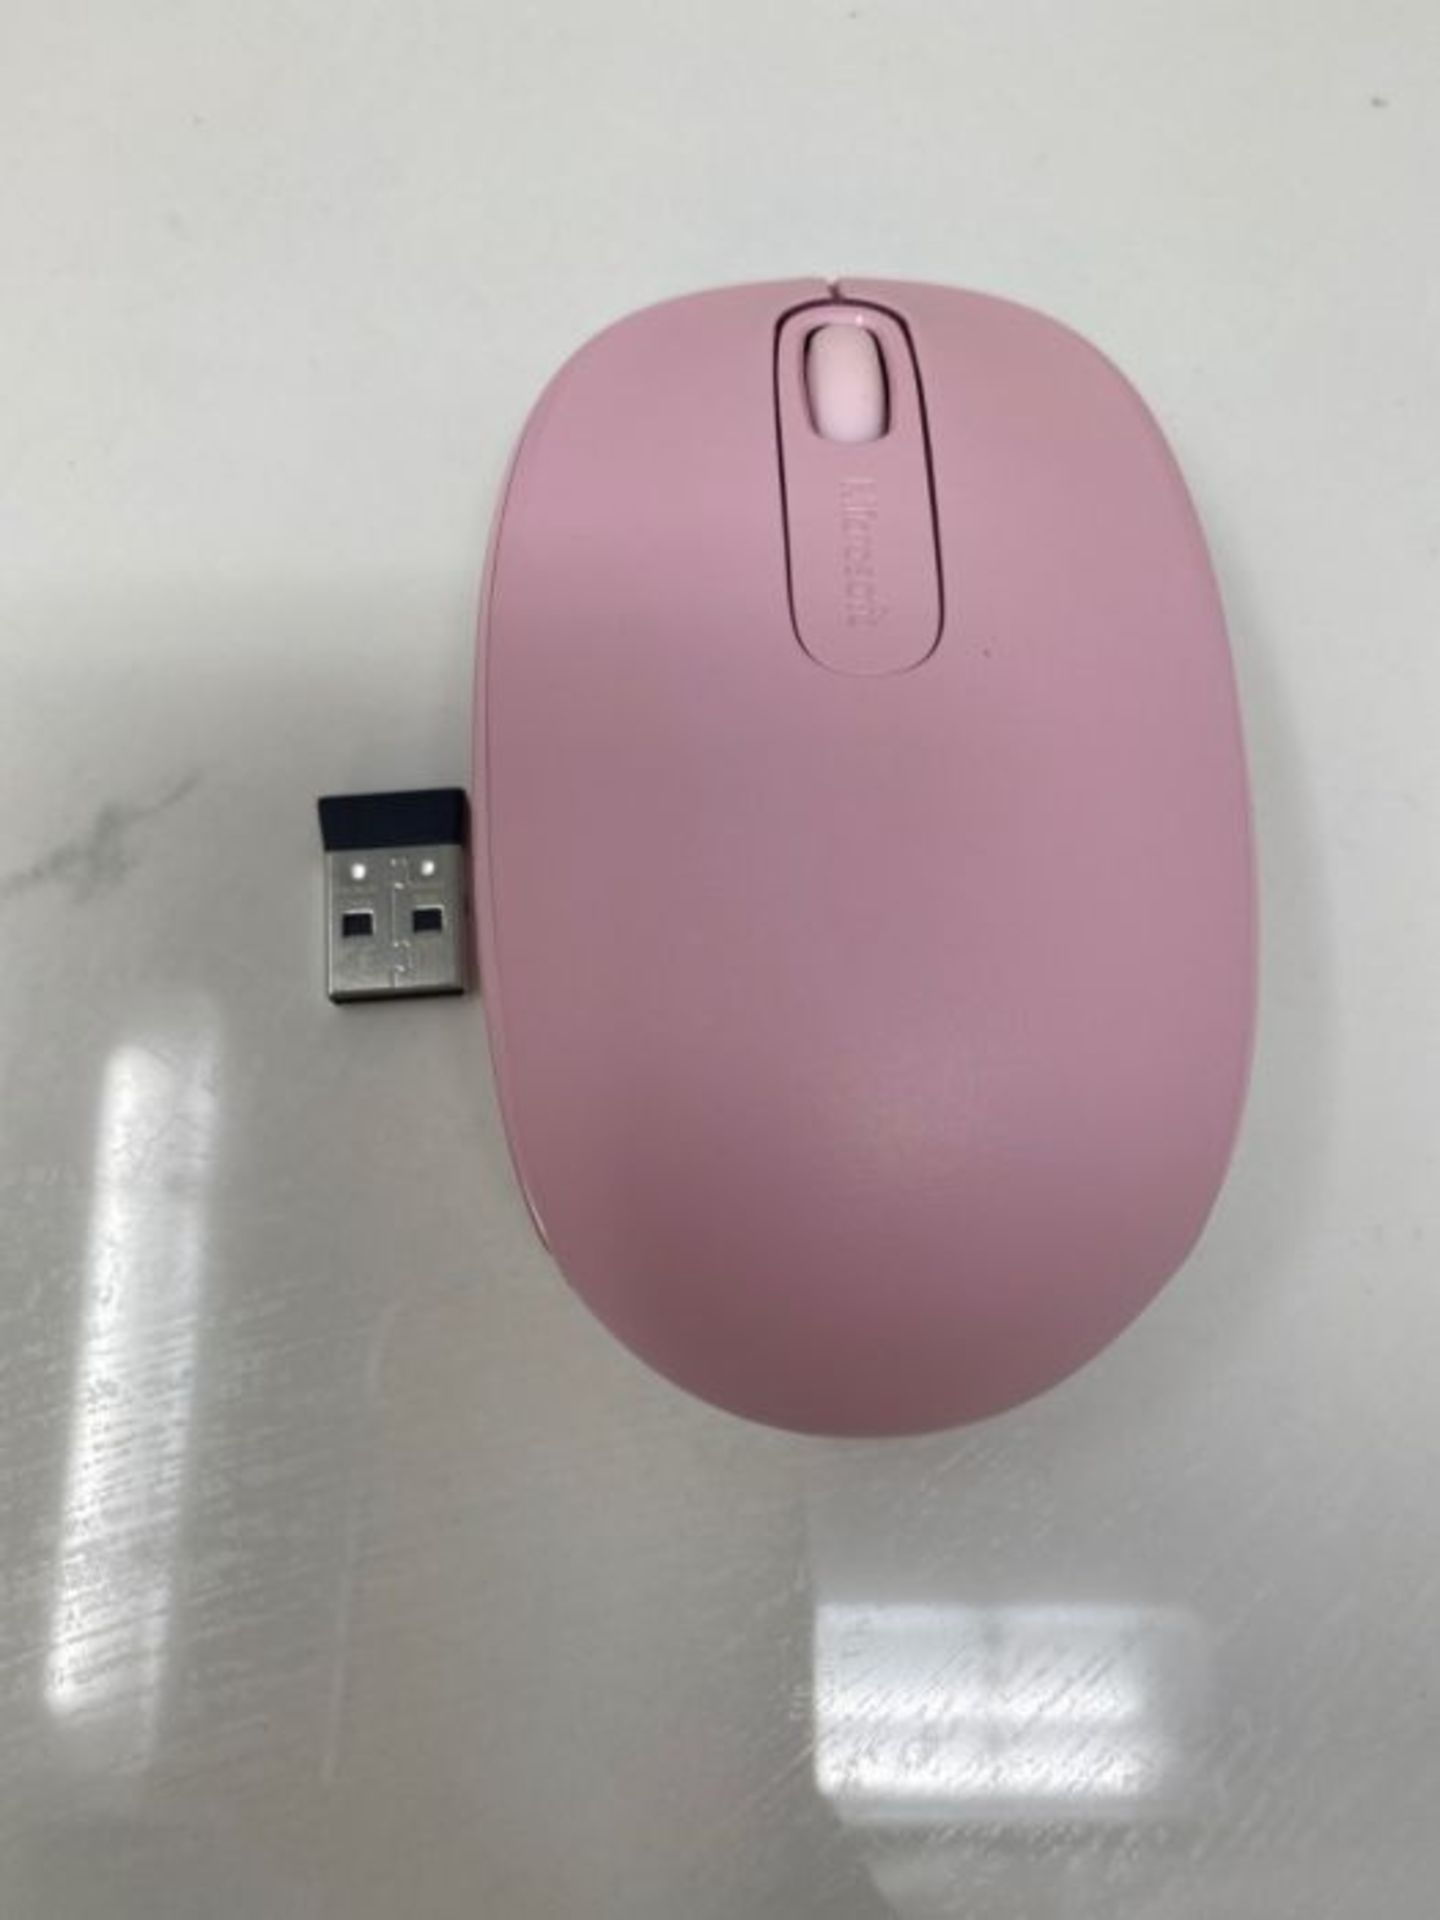 Microsoft Wireless Mobile Mouse 1850 - Pink - Image 2 of 2